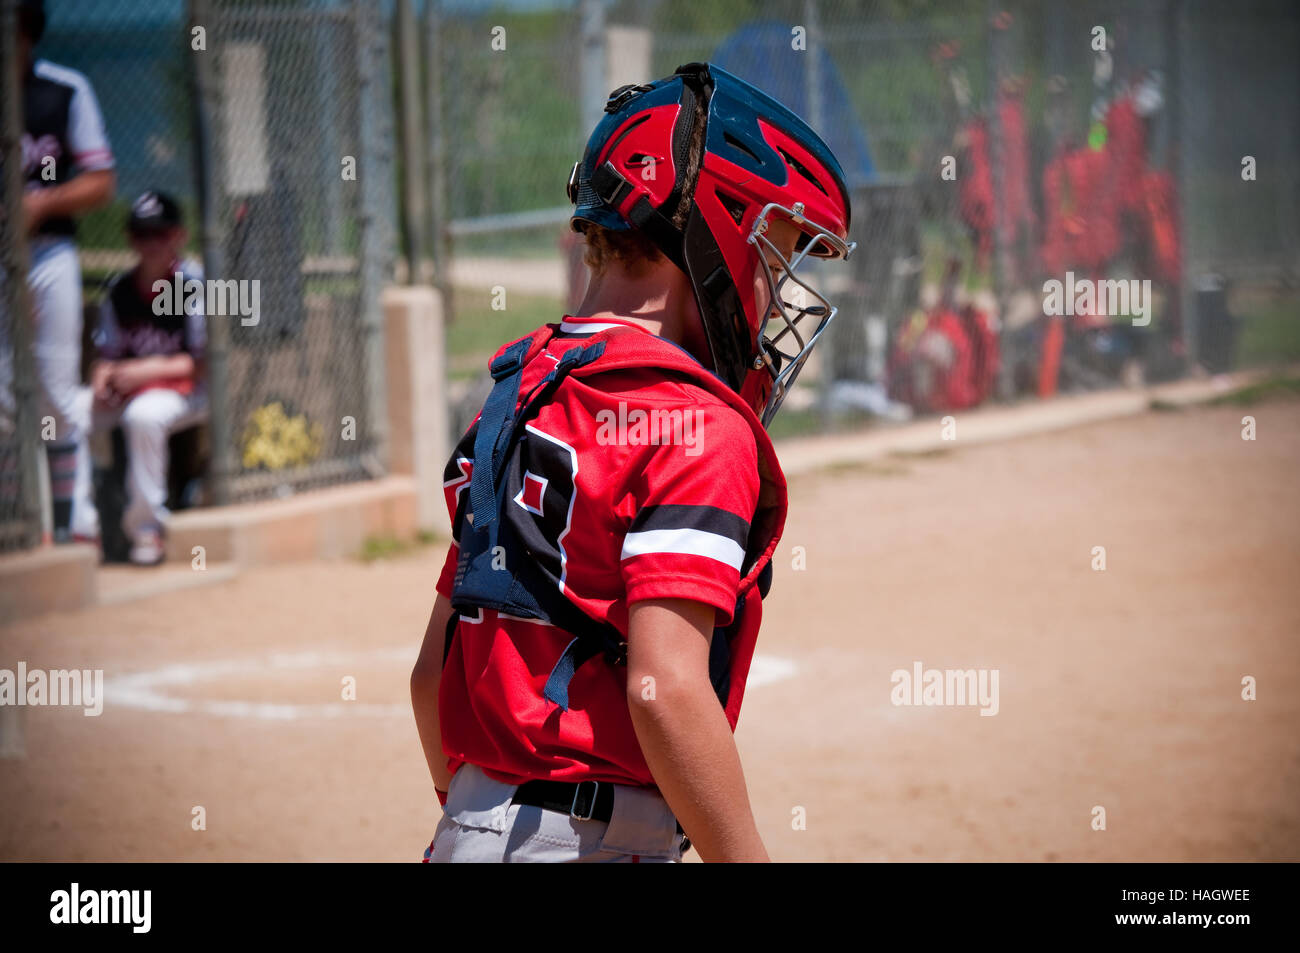 American youth baseball catcher wearing protection gear and mask. Stock Photo